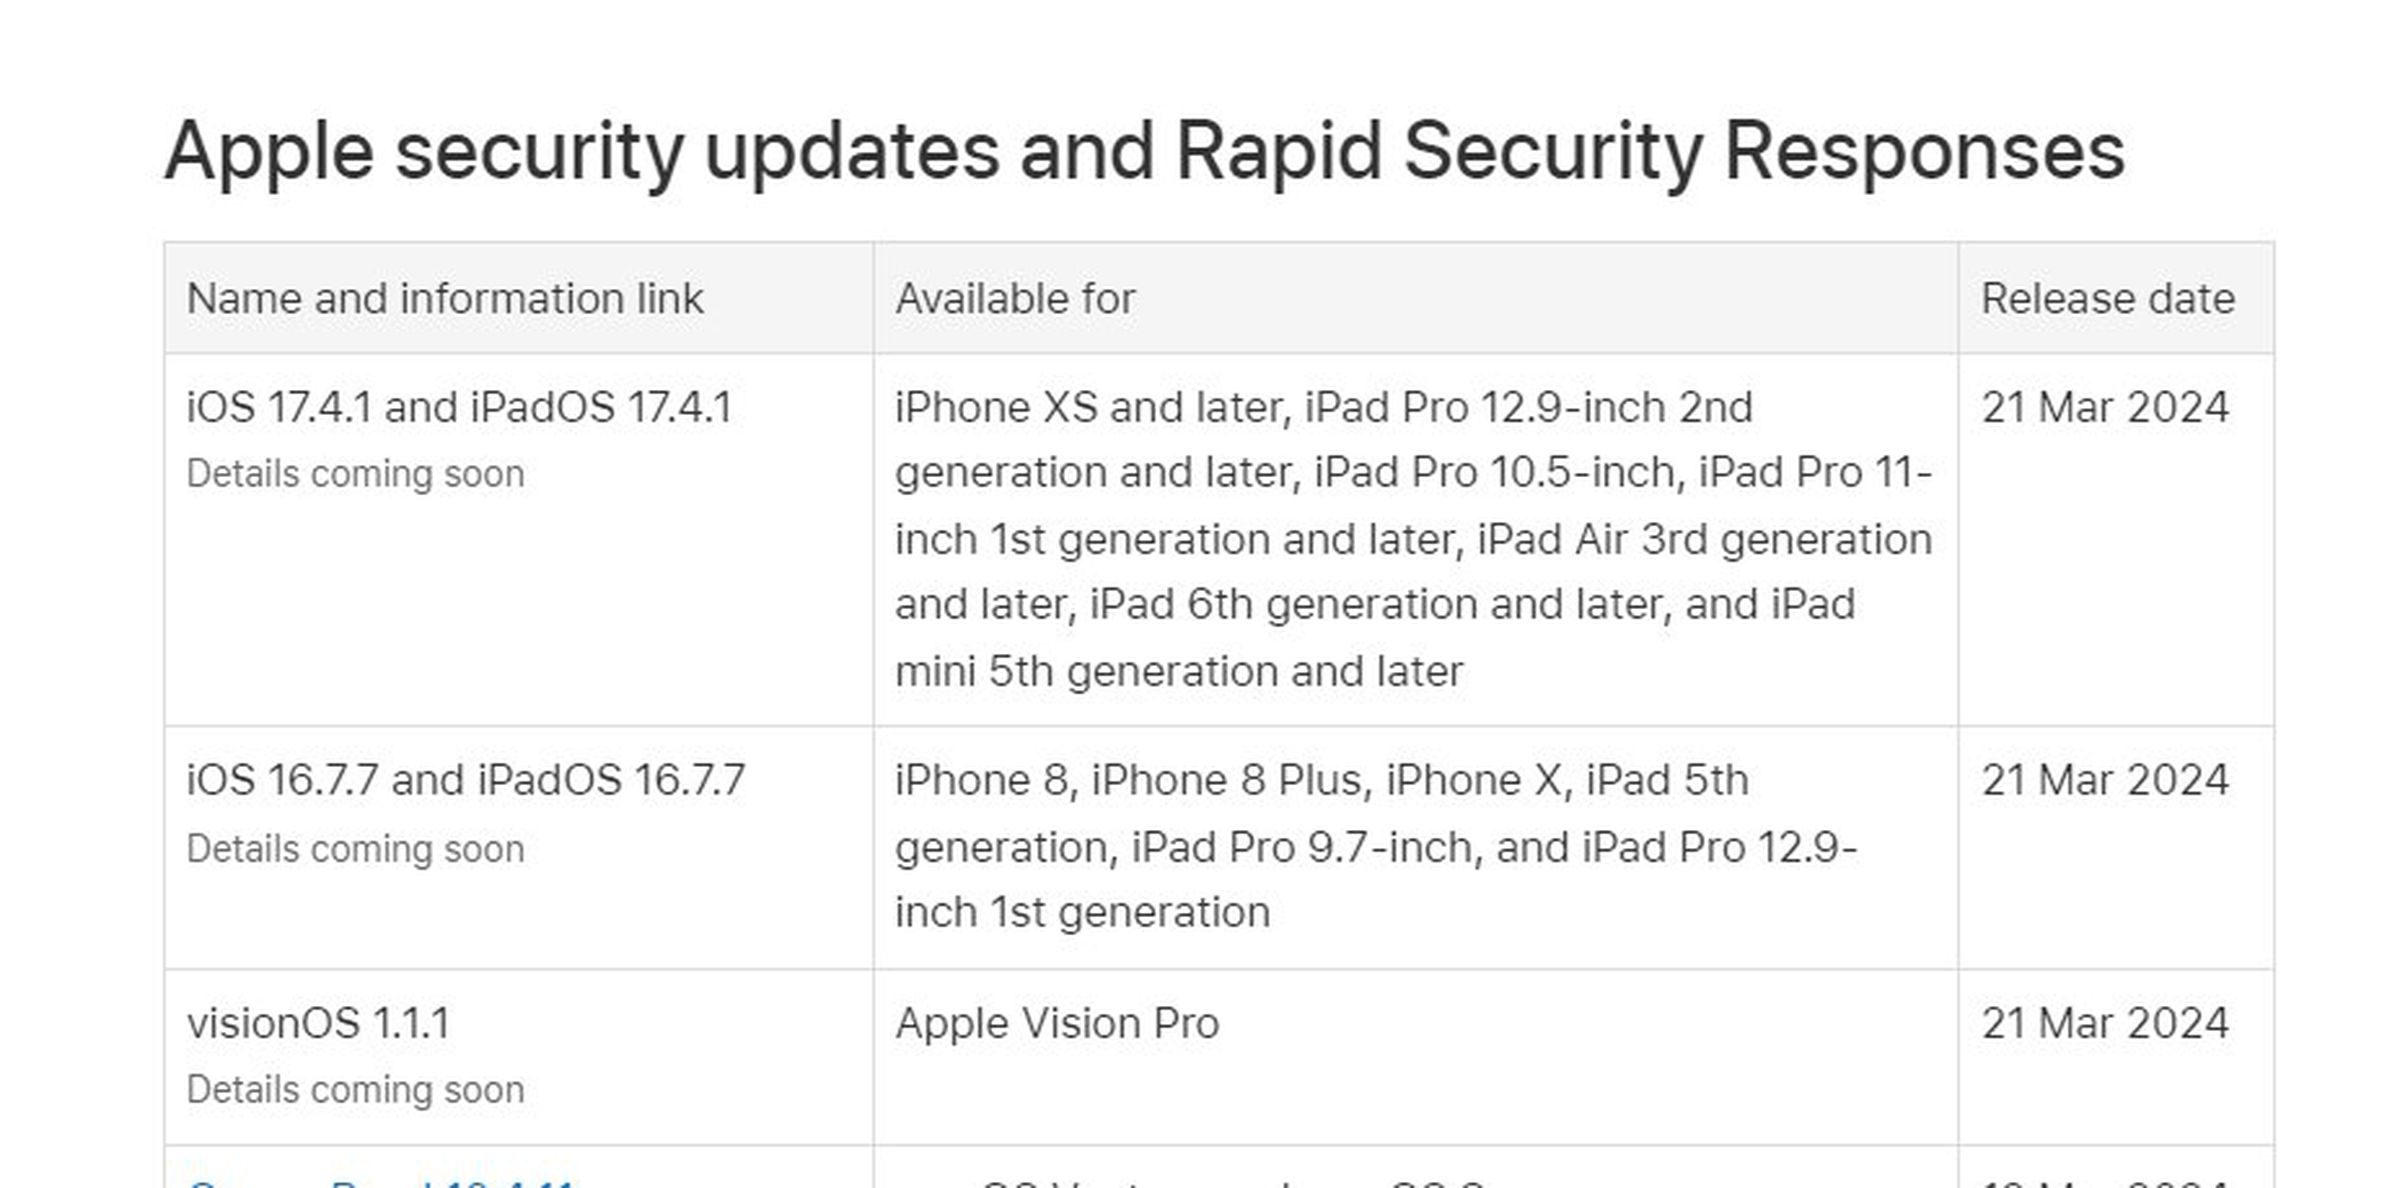 iOS 17.4.1 and iPadOS 17.4.1 Details coming soon  iOS 16.7.7 and iPadOS 16.7.7 Details coming soon  visionOS 1.1.1 Details coming soon